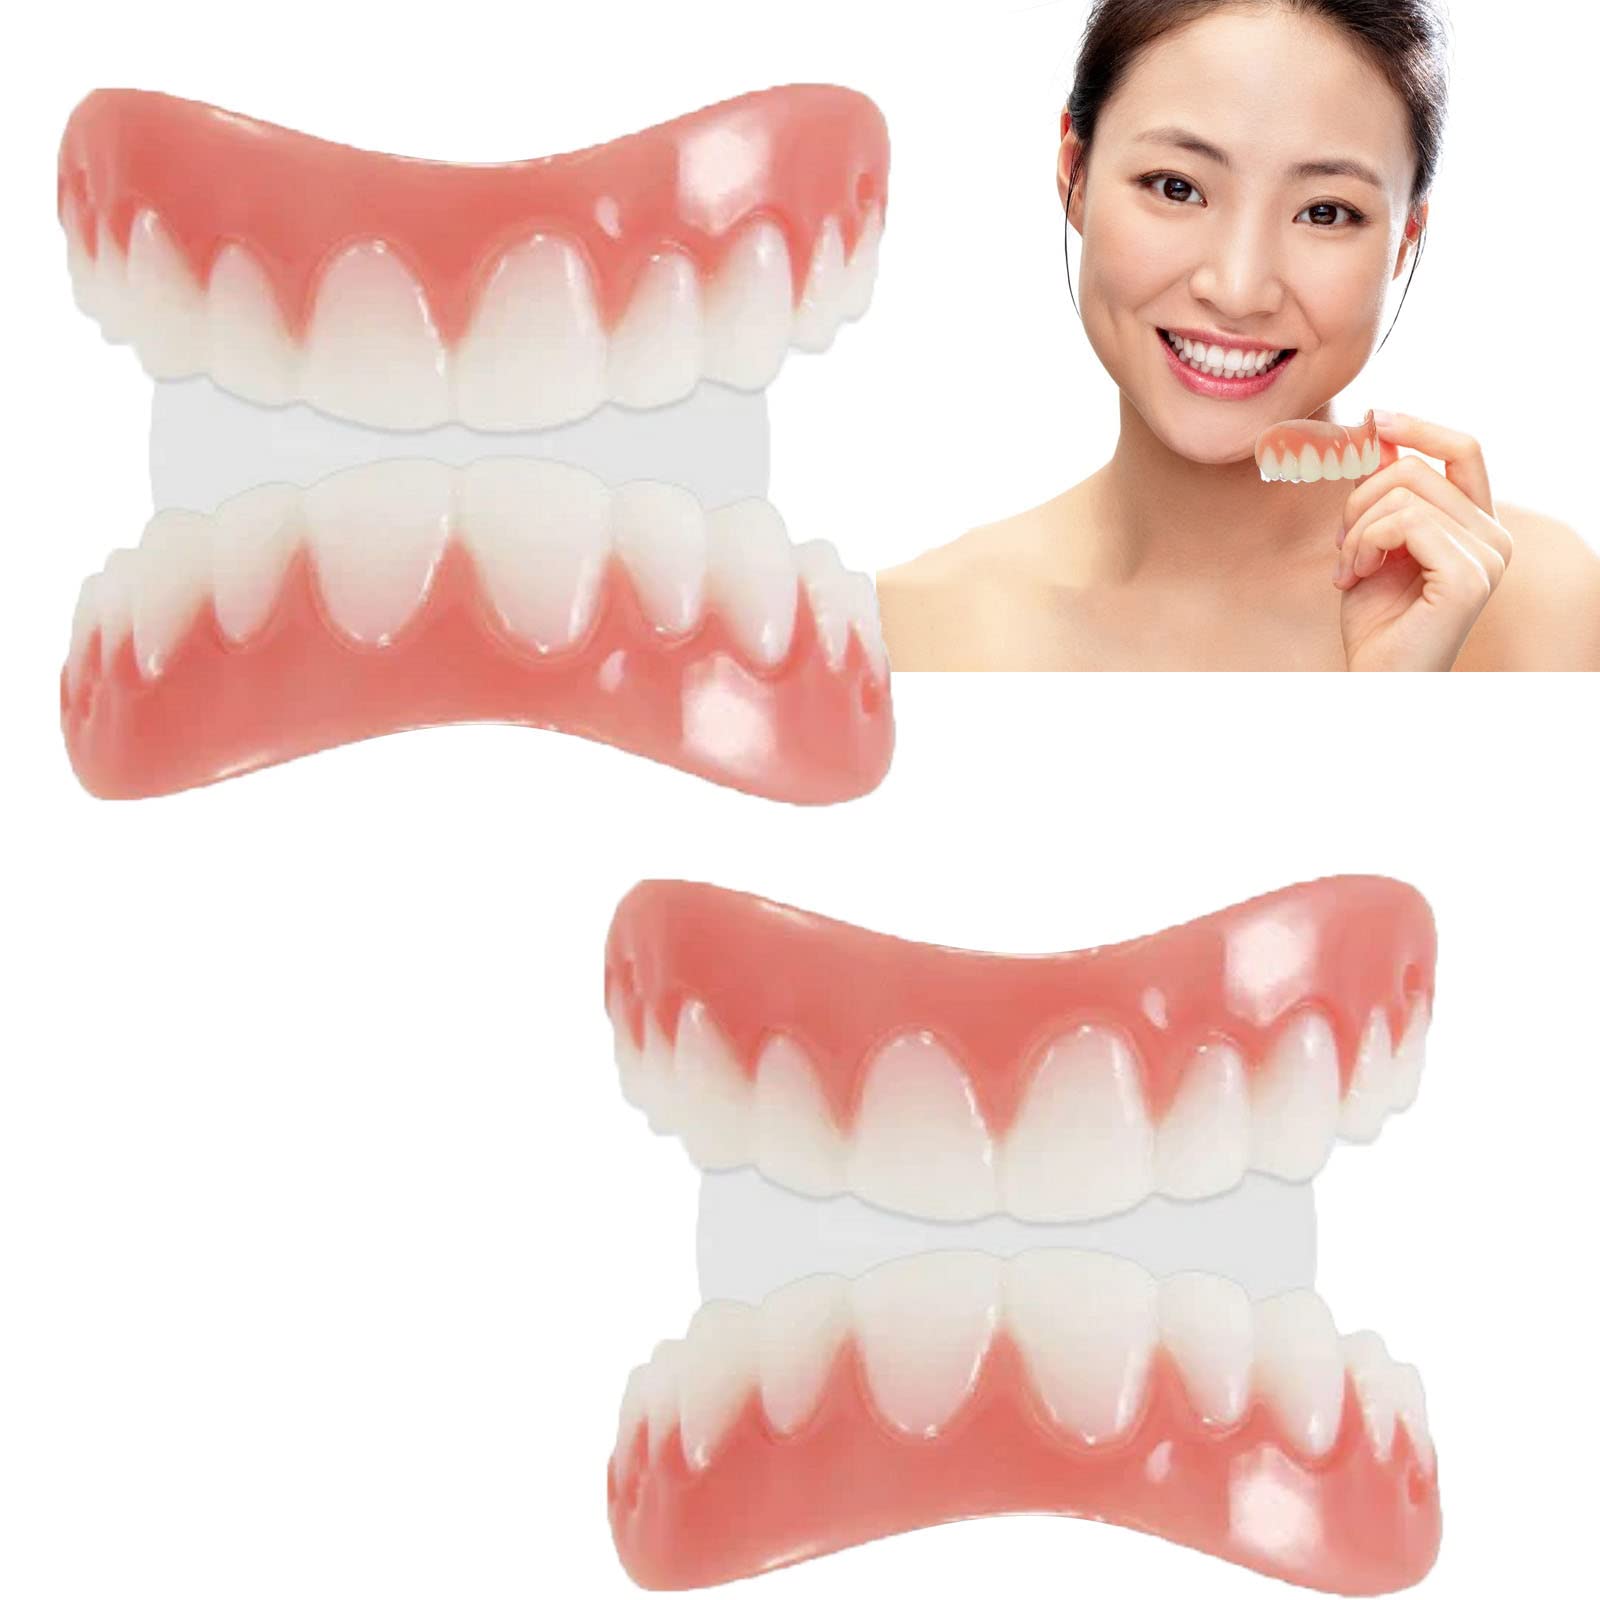 Snap on Teeth You Can Eat with - Adjustable Snap-On Dentures